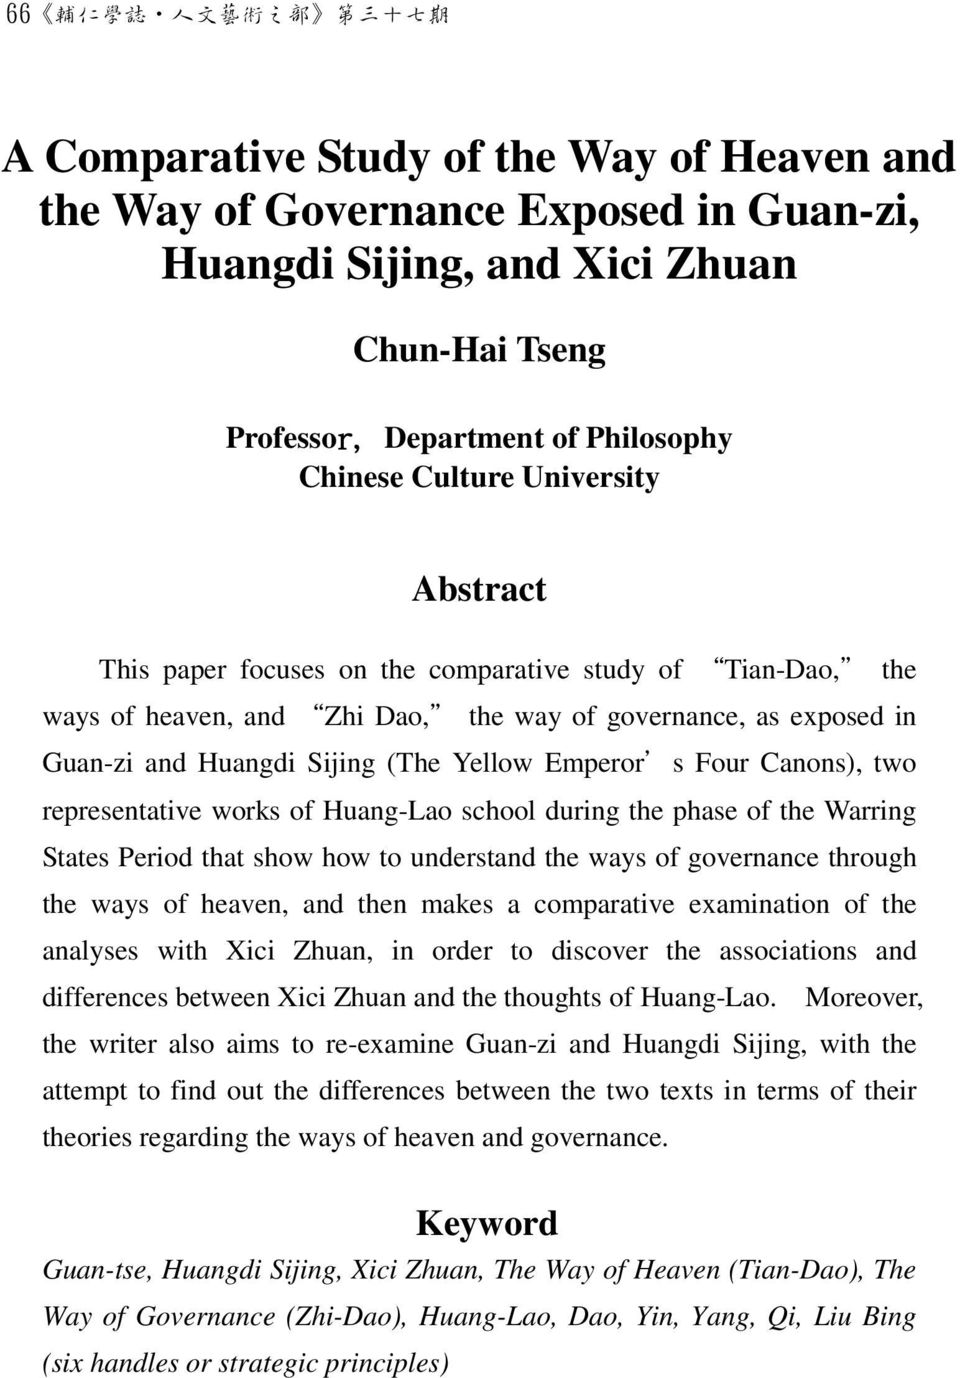 Sijing (The Yellow Emperor s Four Canons), two representative works of Huang-Lao school during the phase of the Warring States Period that show how to understand the ways of governance through the